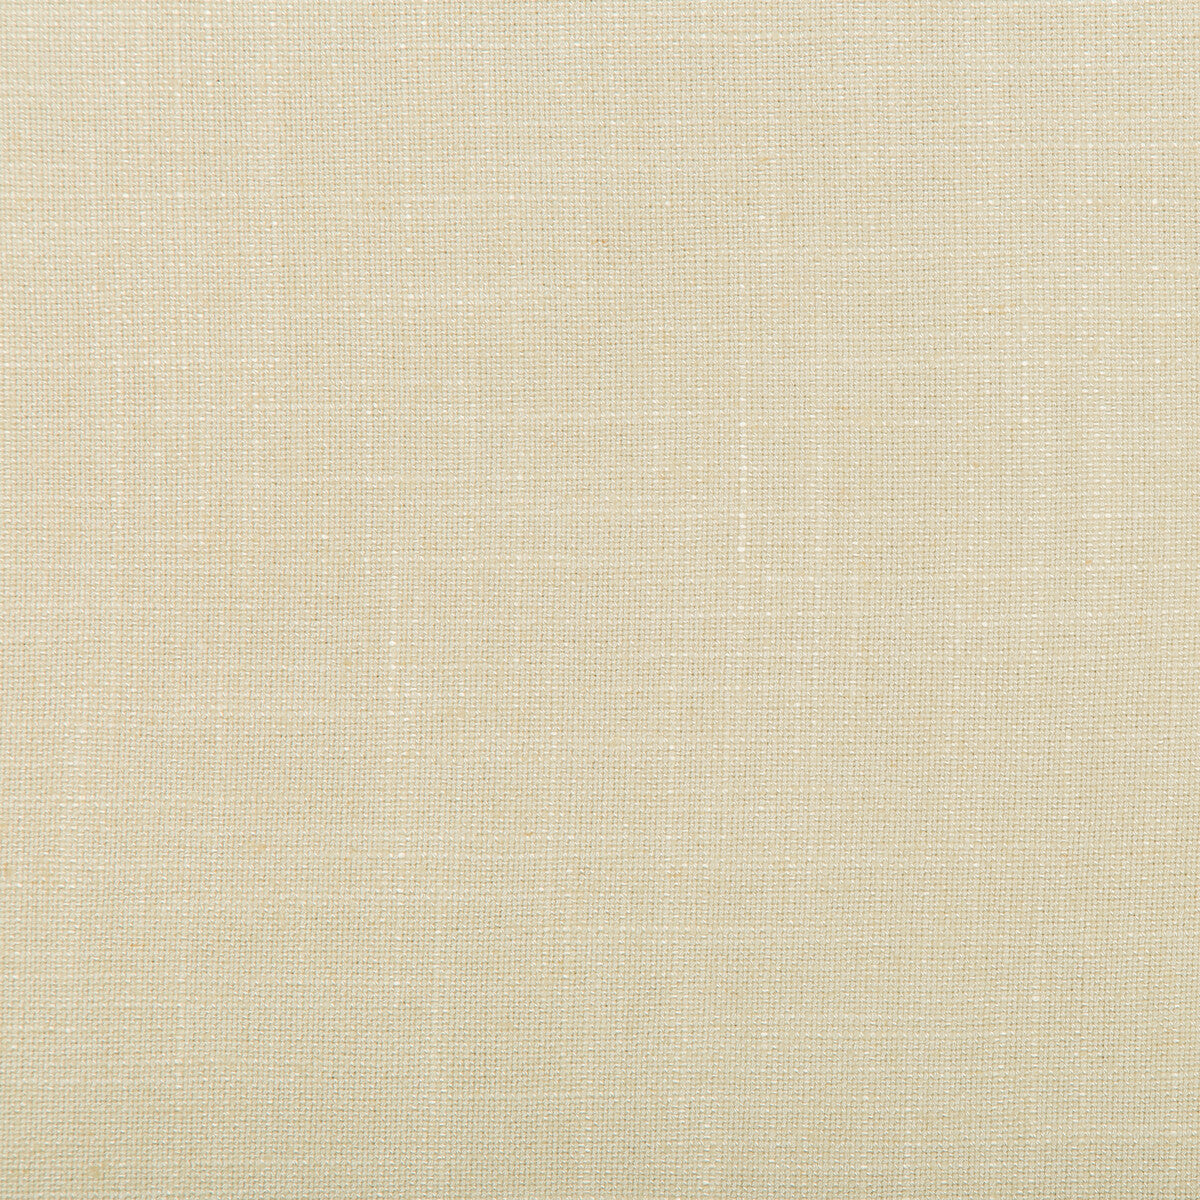 Aura fabric in fossil color - pattern 35520.1116.0 - by Kravet Design